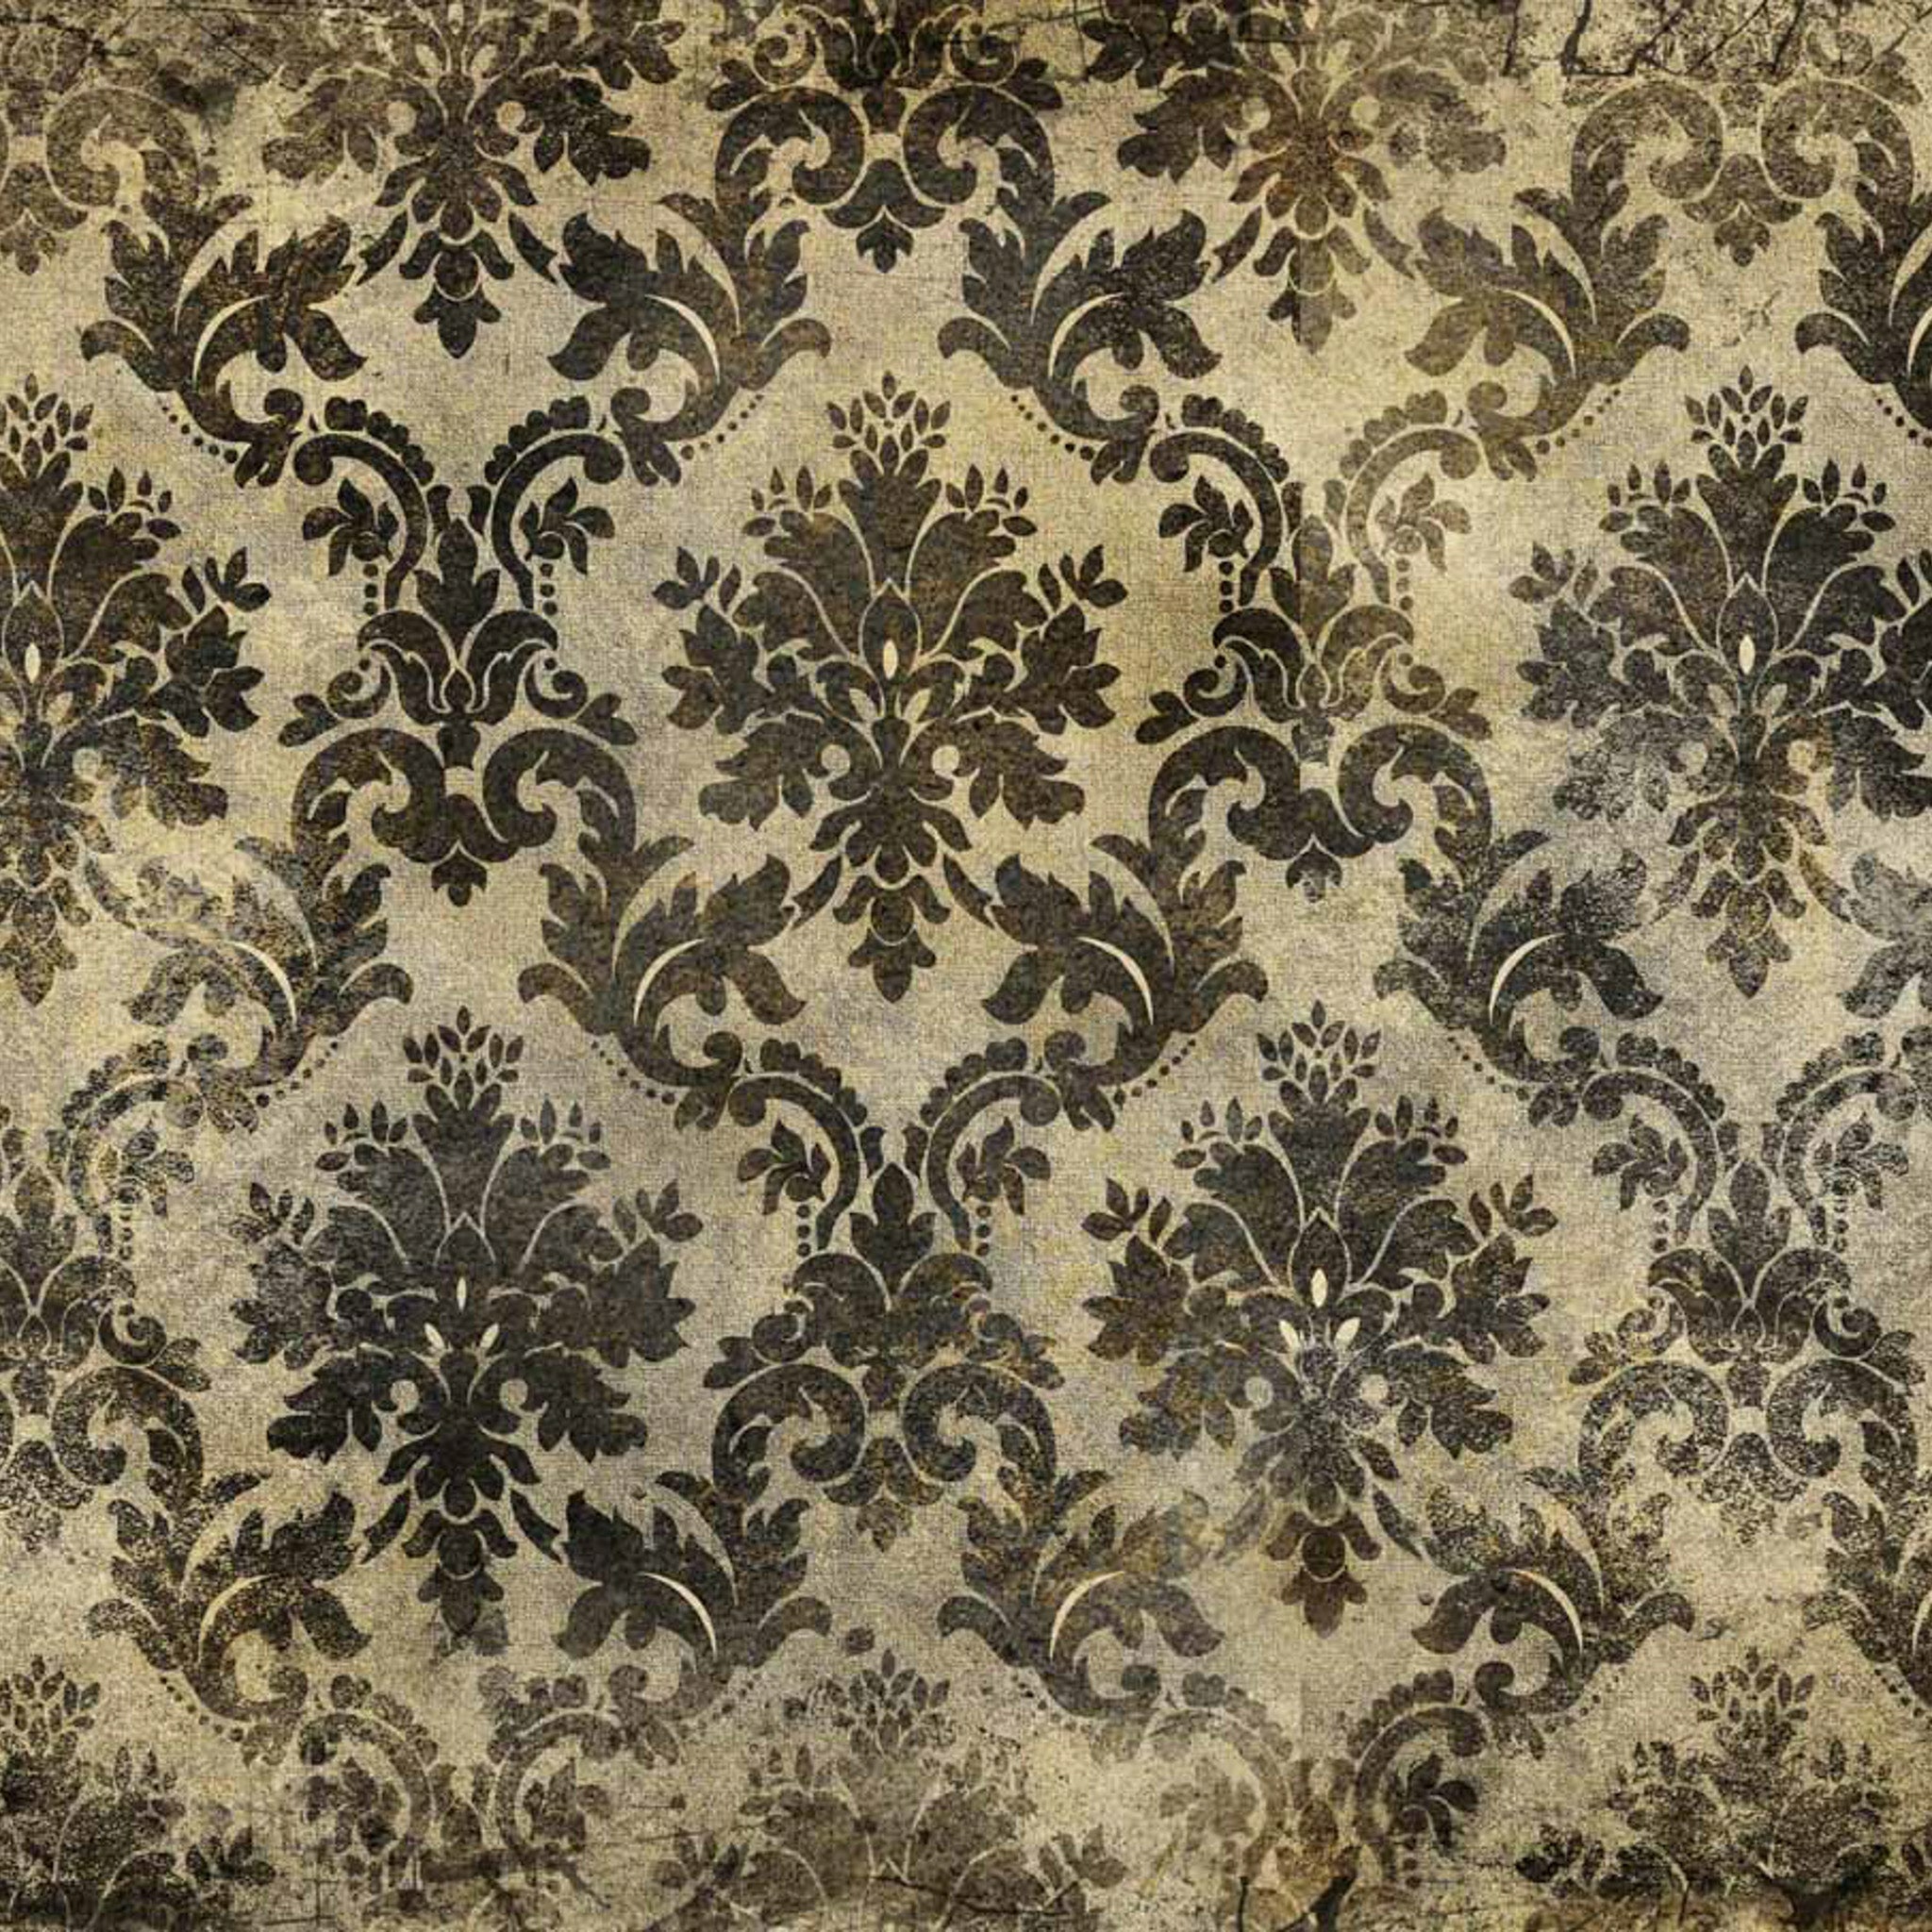 Vintage style Weathered Damask A0 Decoupage Rice Paper close up.